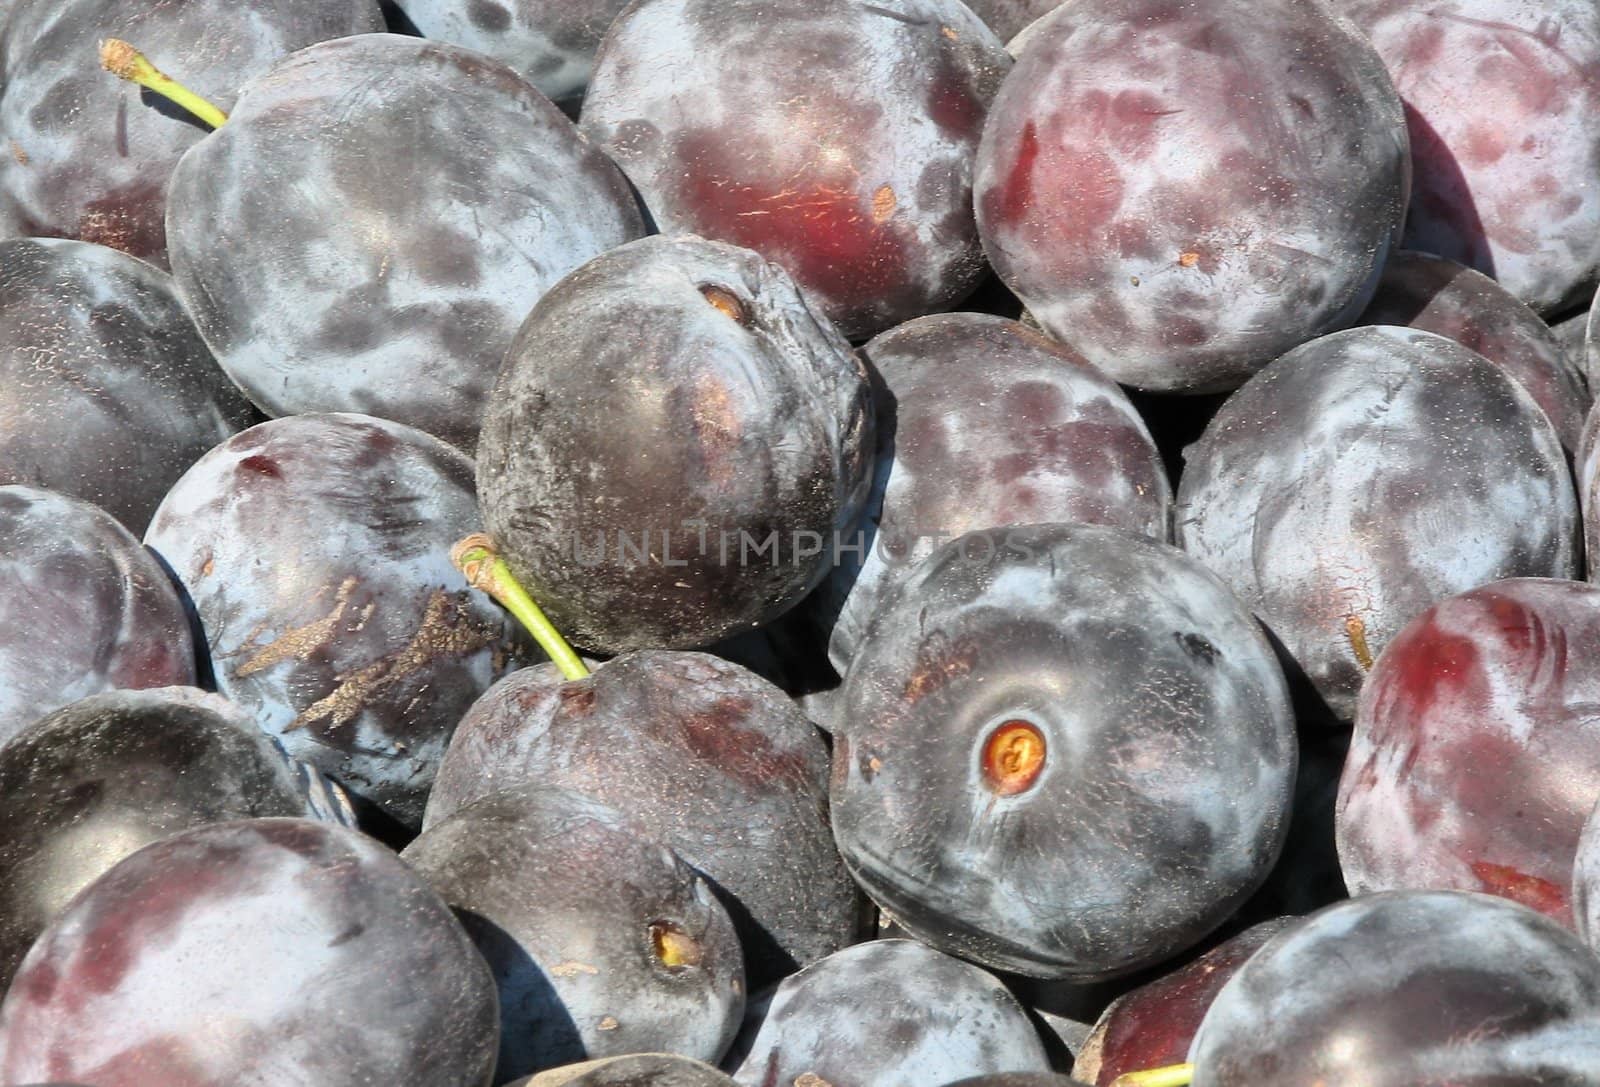 Plums by FotoFrank